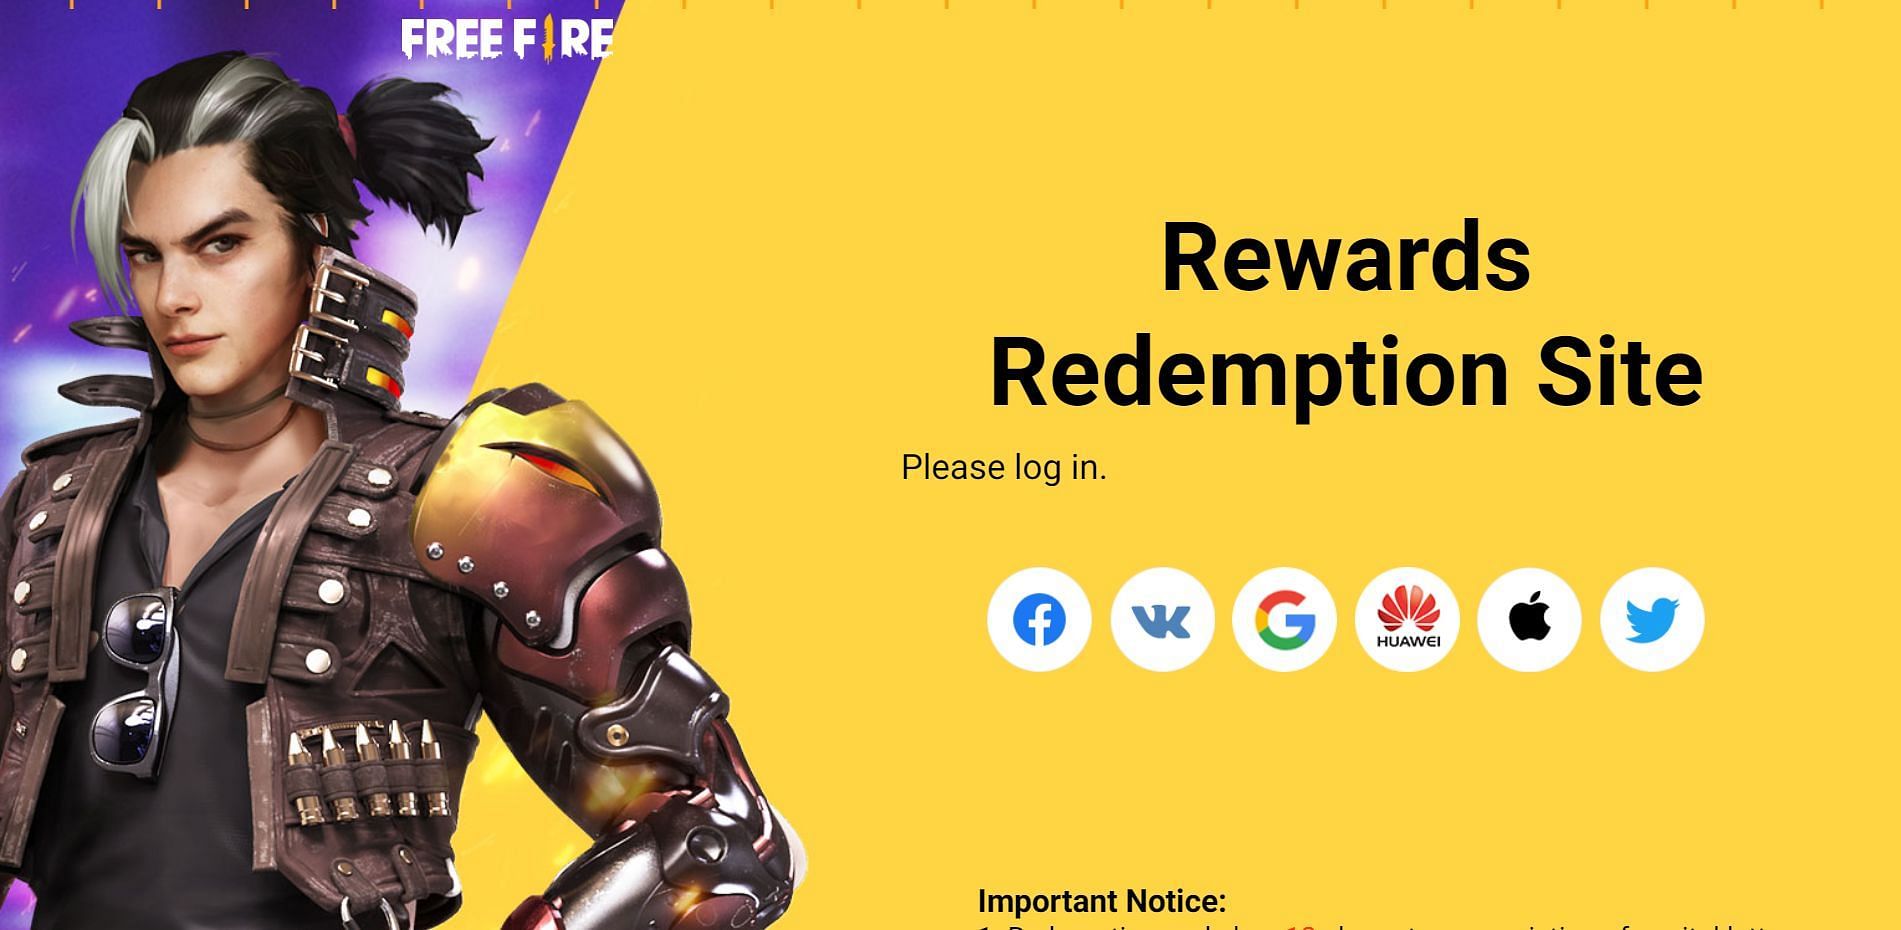 The Rewards Redemption Site requires users to sign in using any one of the platforms (Image via Garena)